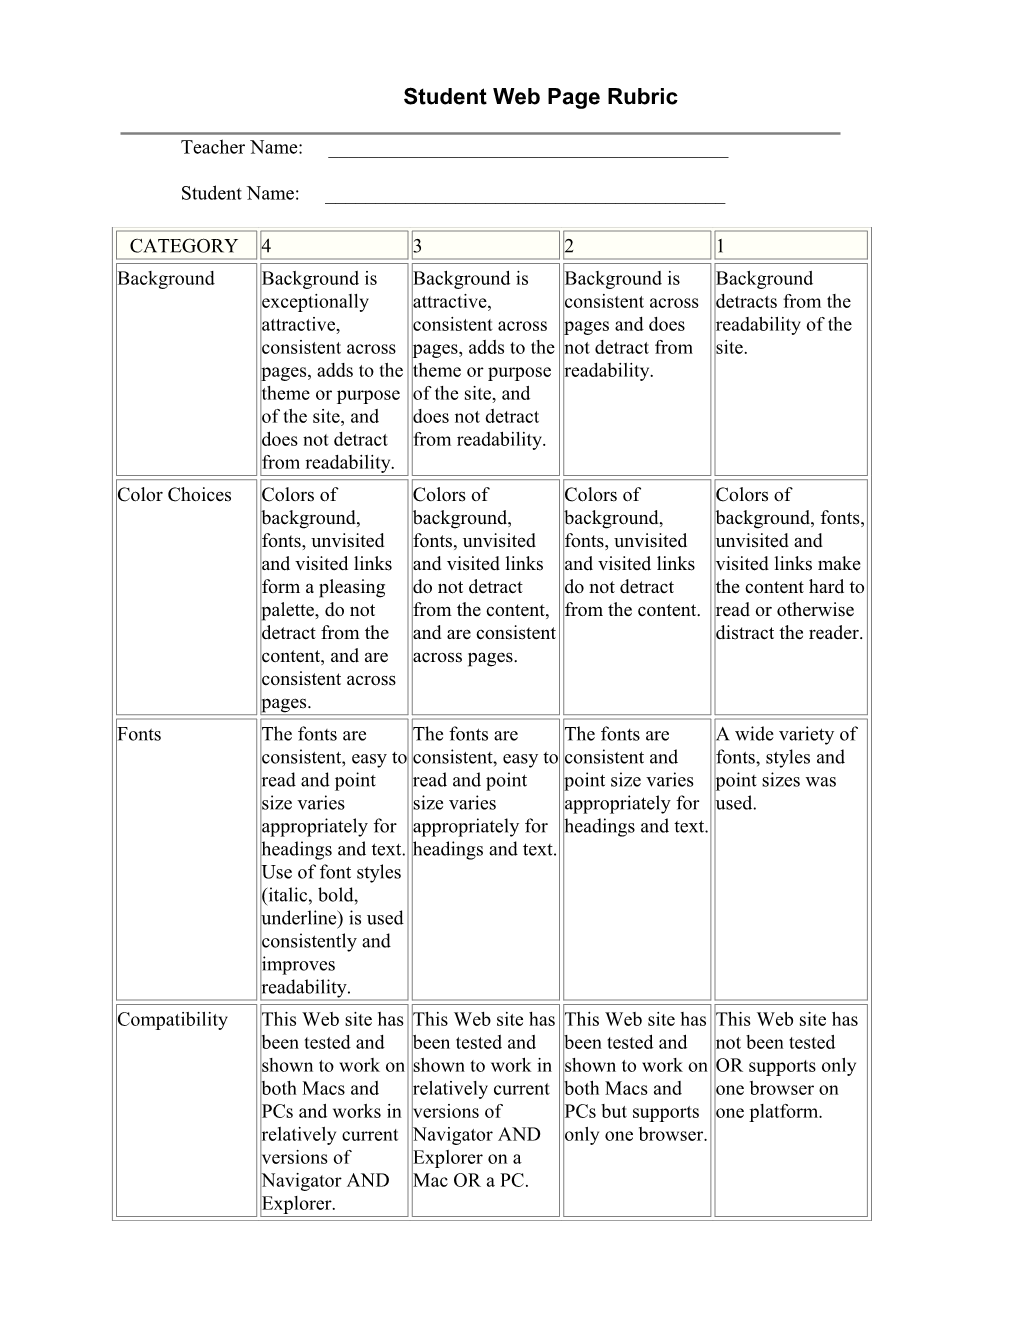 Student Web Page Rubric